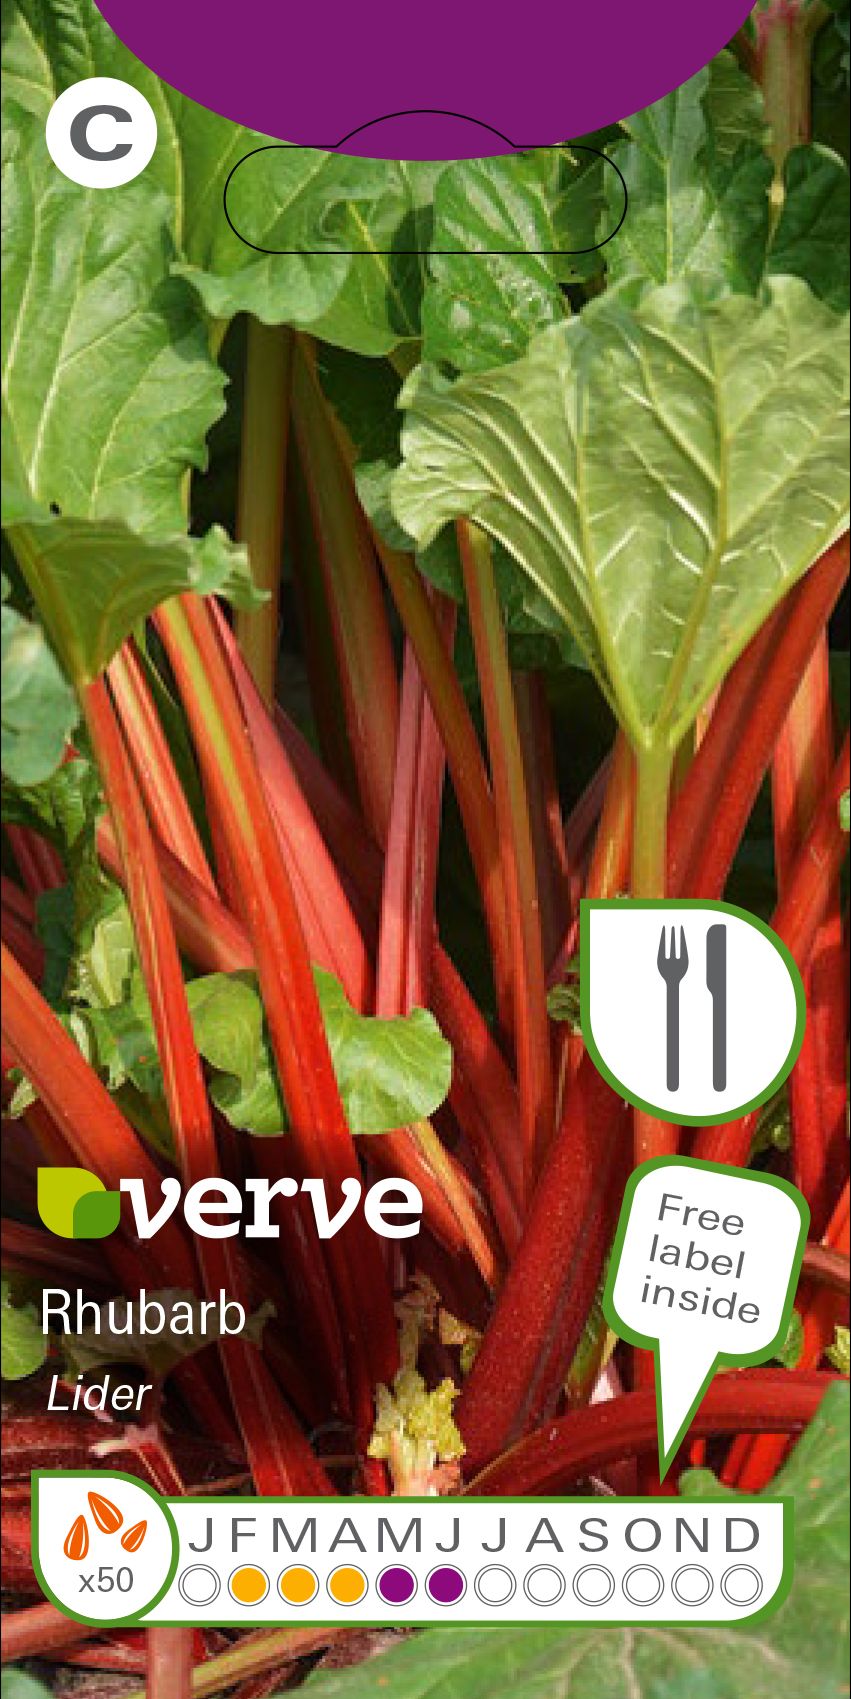 How to Grow and Harvest Rhubarb - Ted Lare - Design & Build